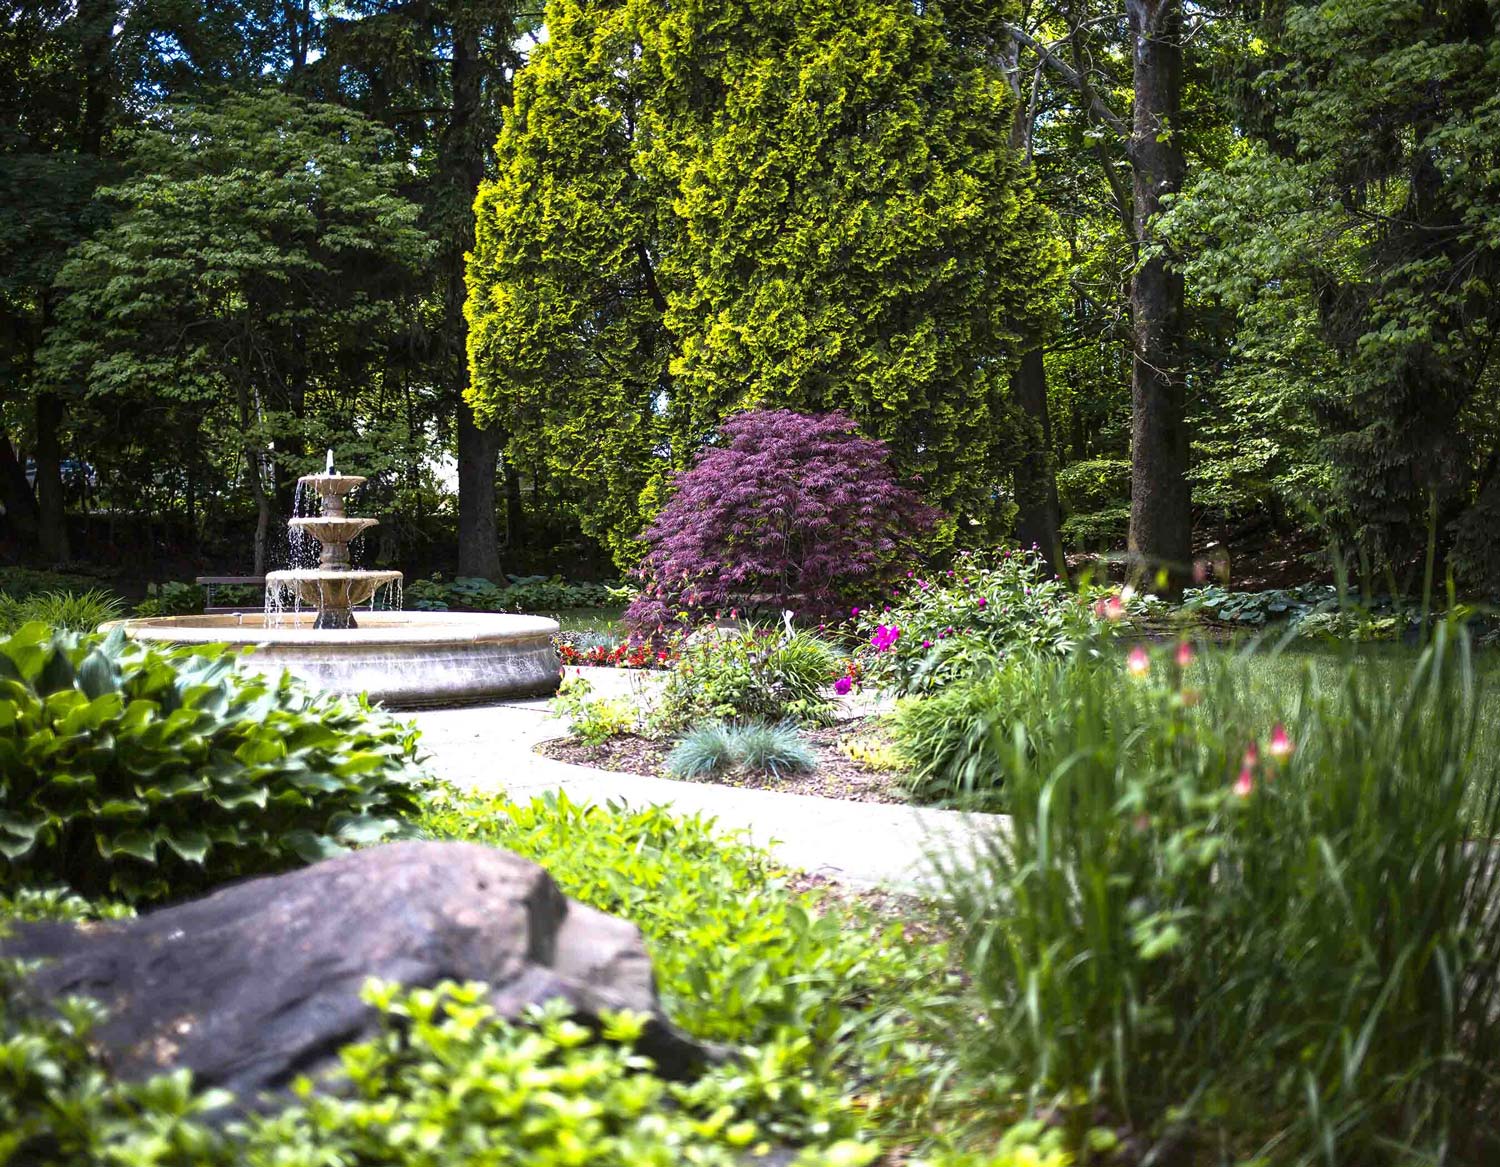 garden full of green trees, bushes, and purple flowers next to a fountain